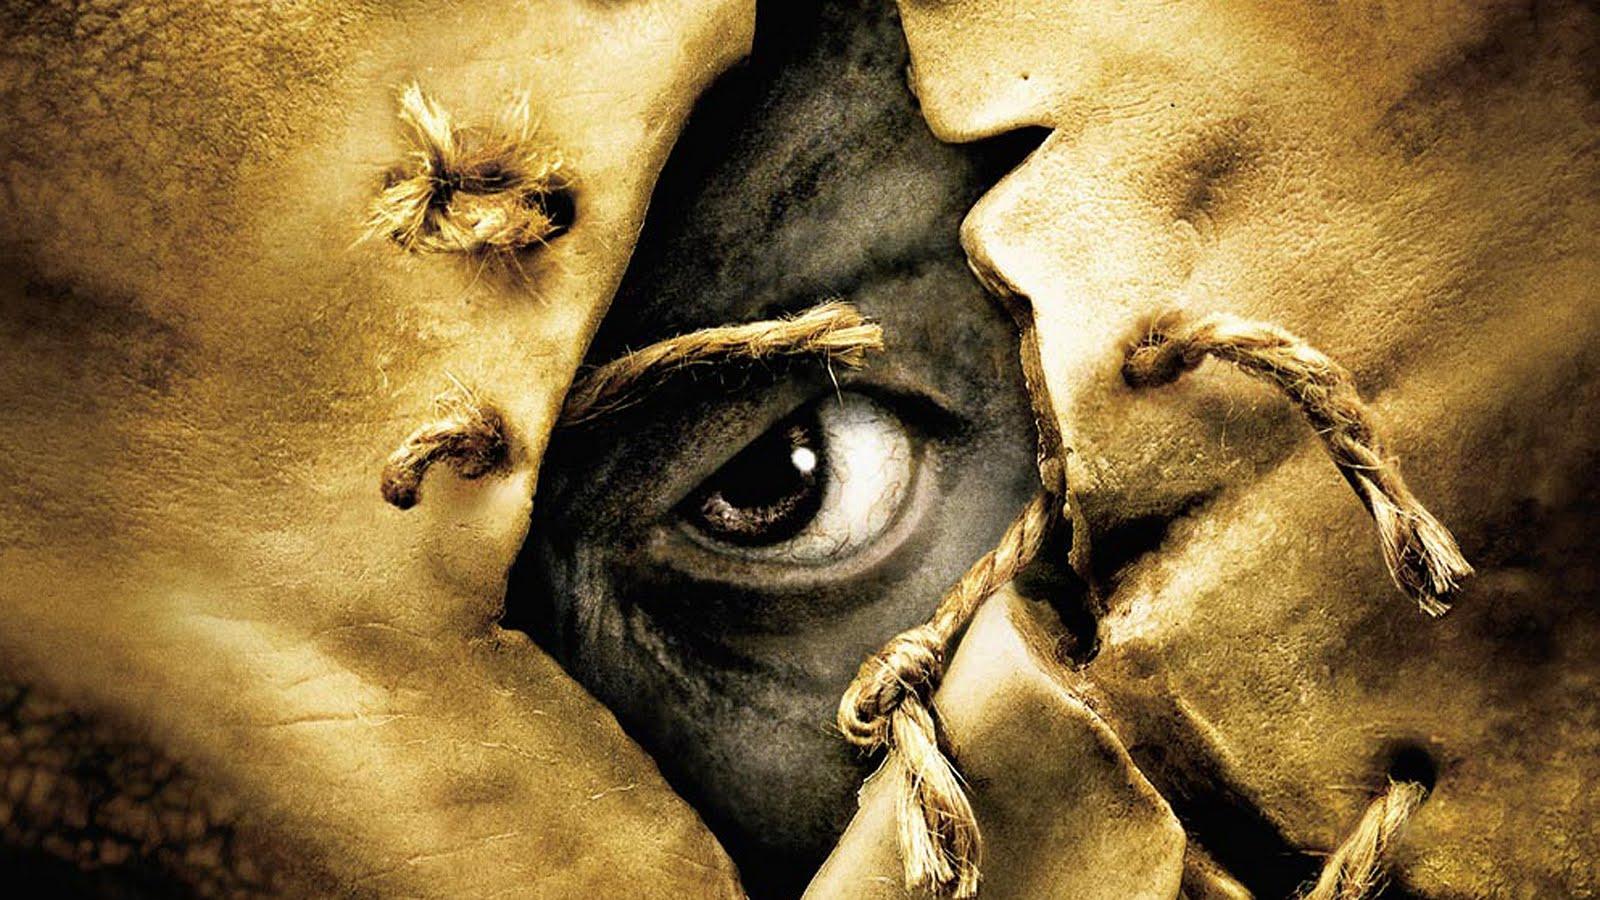 Victor Salva's Legal Trouble Affects “Jeepers Creepers 3”